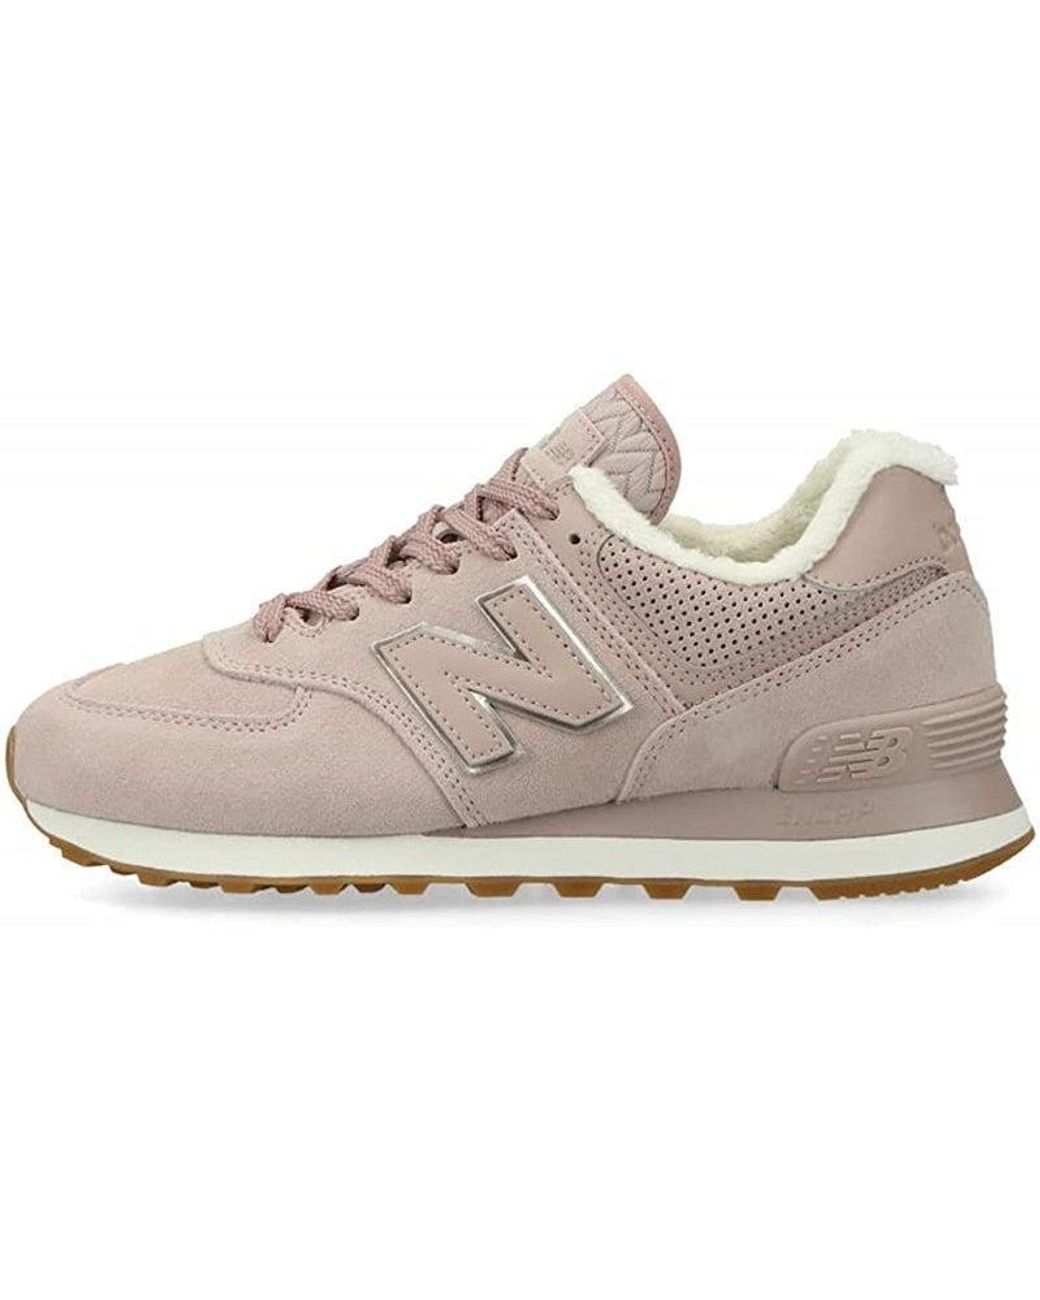 New Balance Suede 574 Trainers in Pink | Lyst